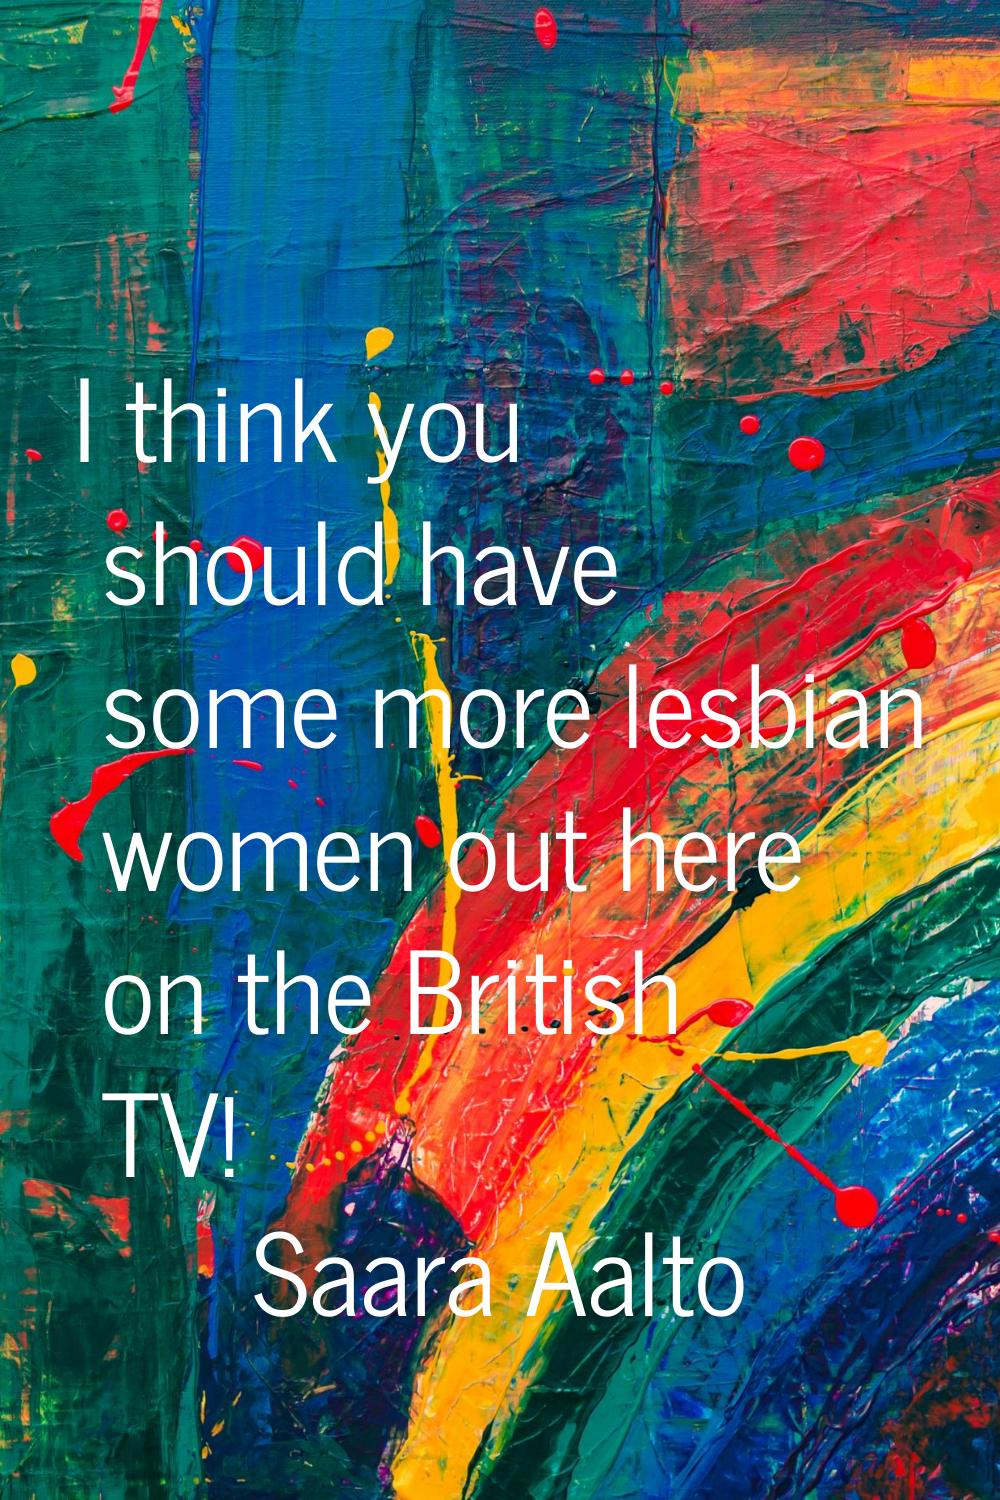 I think you should have some more lesbian women out here on the British TV!